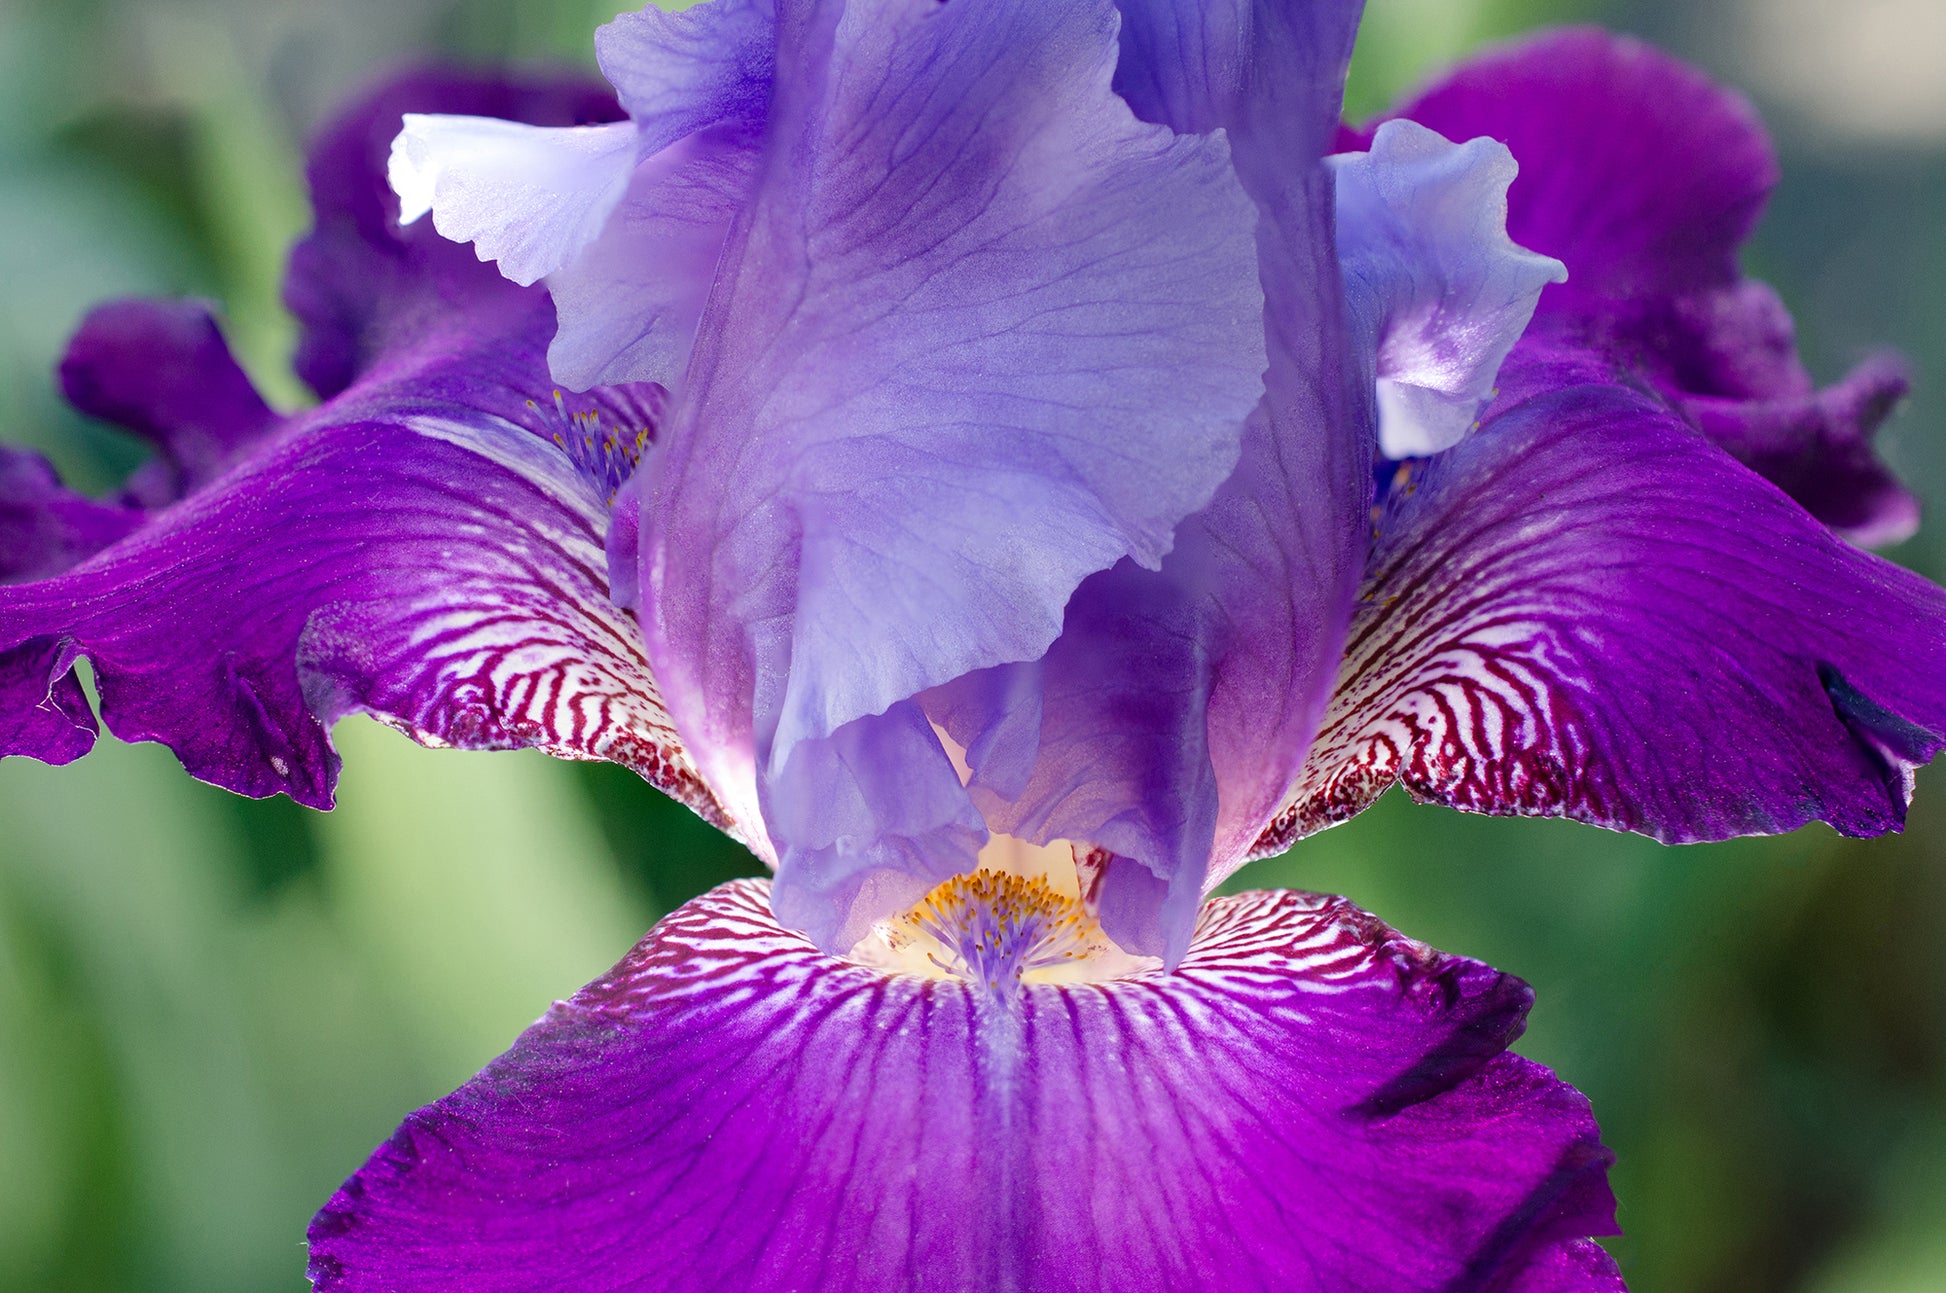 Glowing Iris Floral Nature Photo DIY Wall Decor Instant Download Print - Printable  - PIPAFINEART